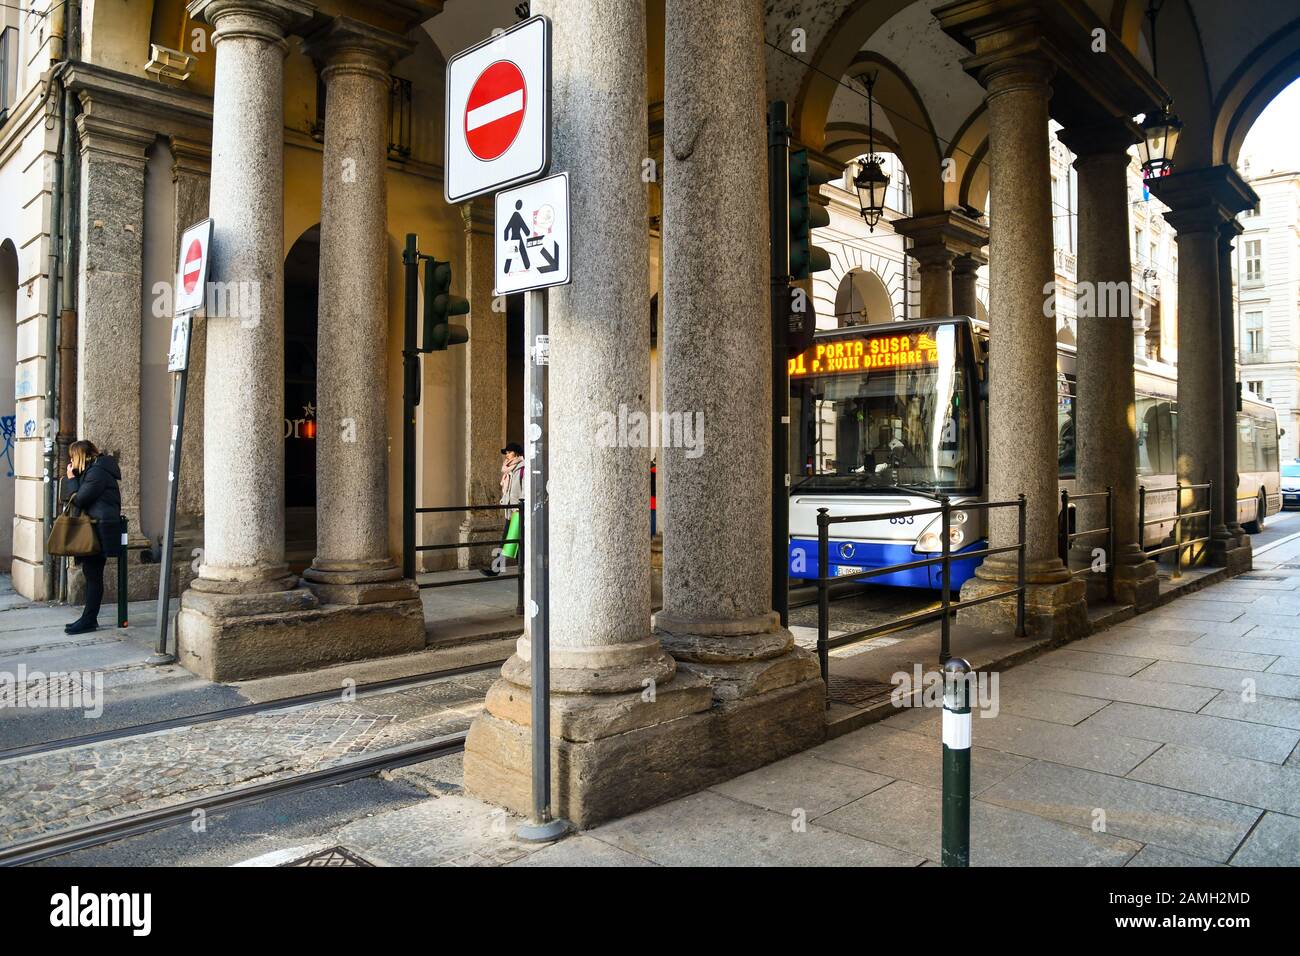 51 line bus passing under the arcade at the crossroads between Via Milano and Via Garibaldi streets in the city centre of Turin, Piedmont, Italy Stock Photo